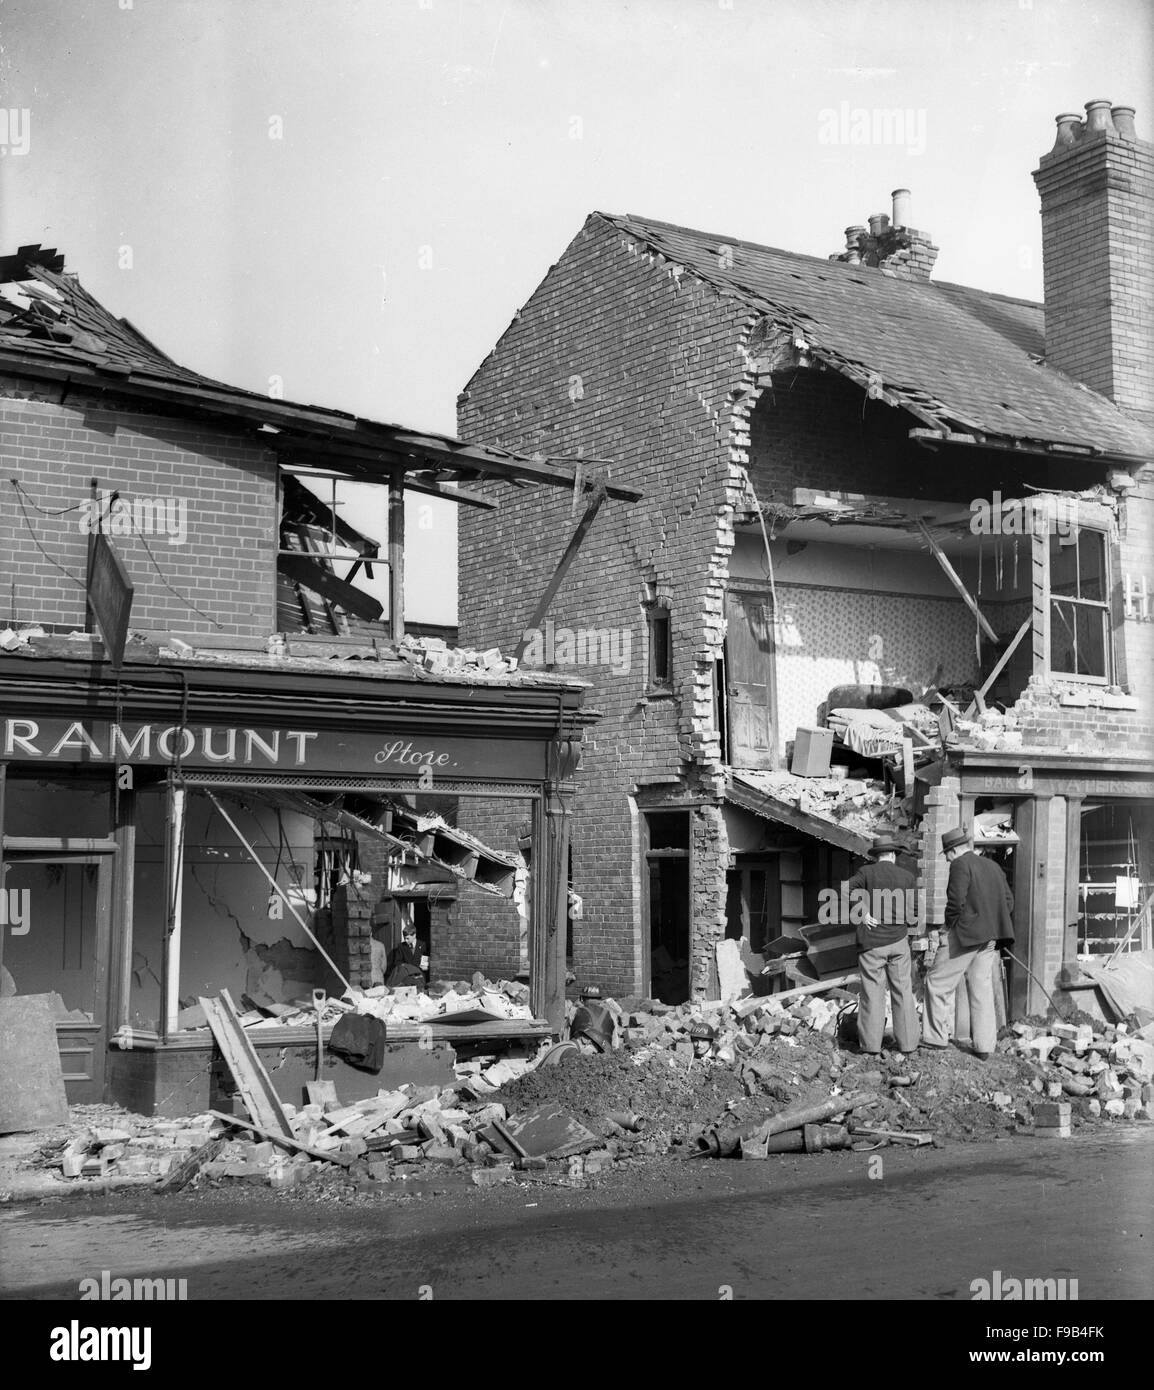 Coventry 1940 shops and houses destroyed in the second world war bombing Blitz Stock Photo